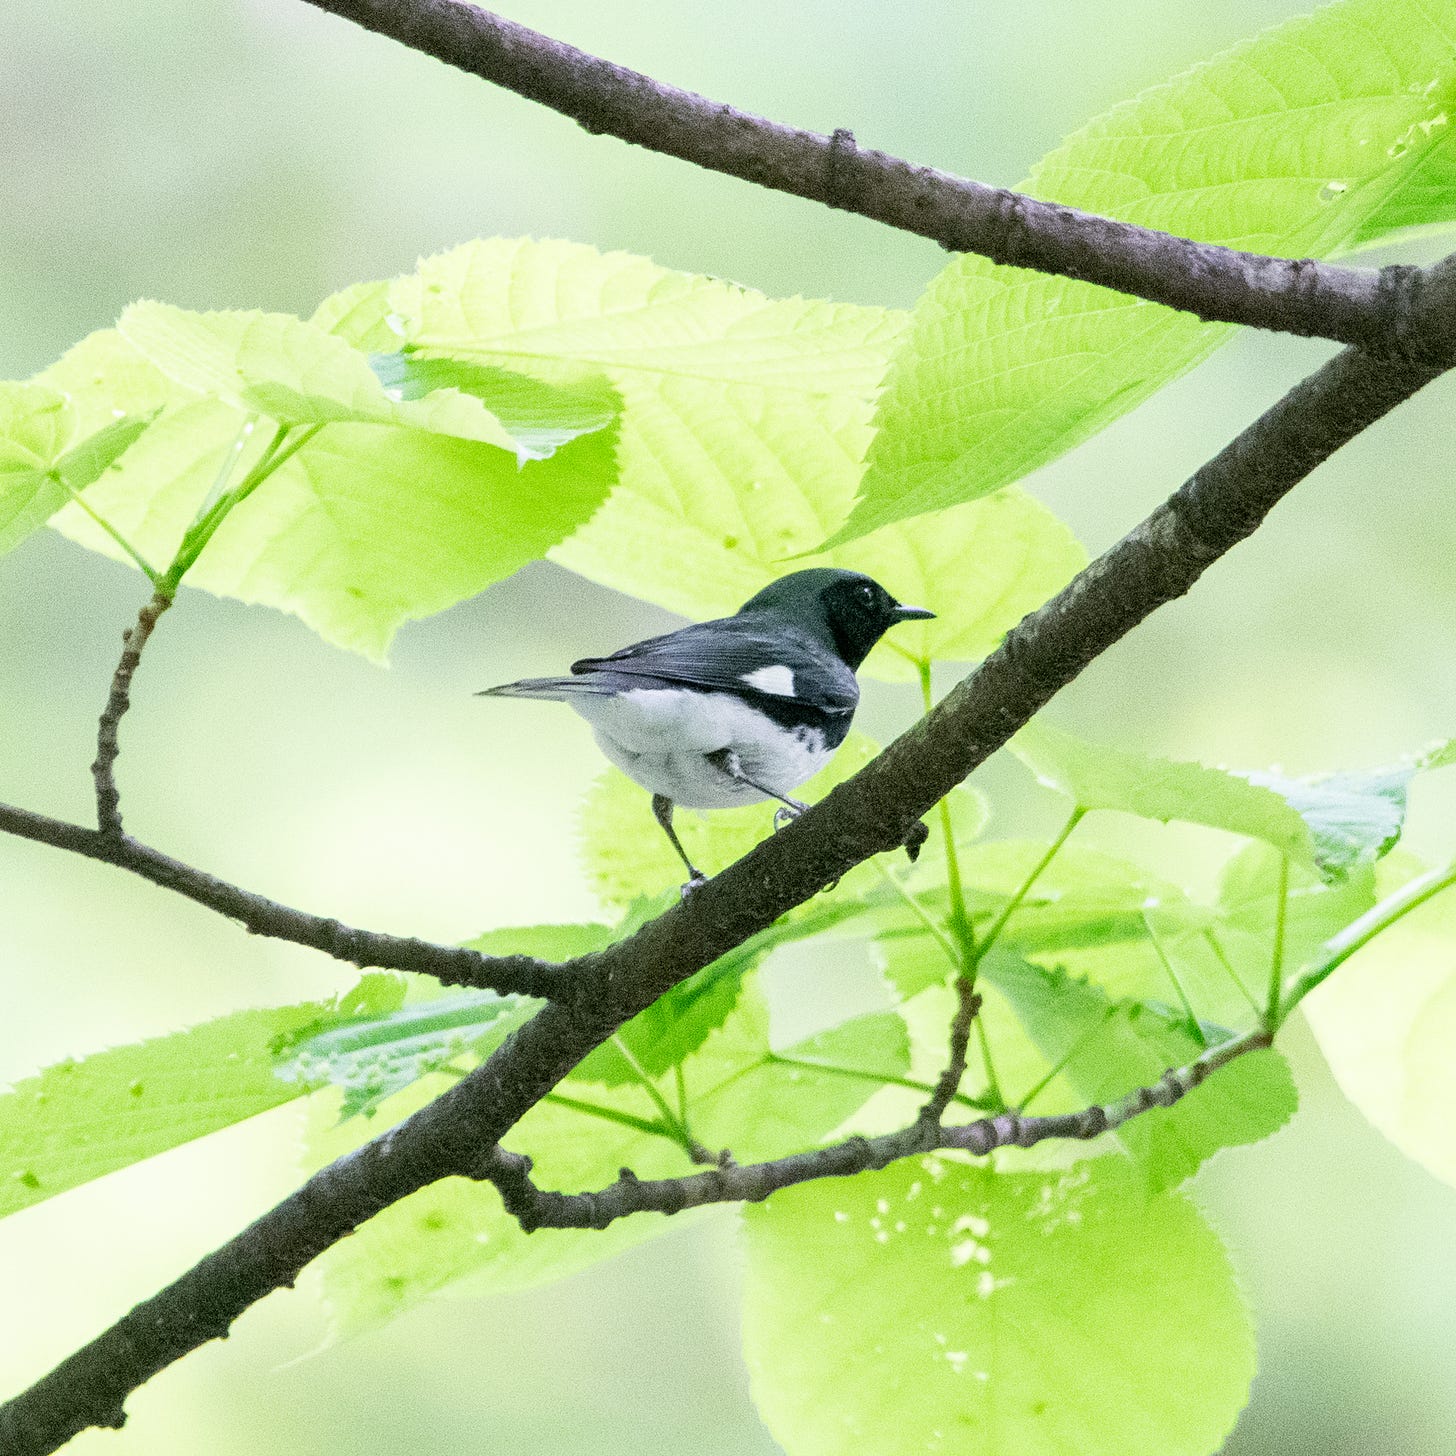 A male black-throated blue warbler, perched in a tree